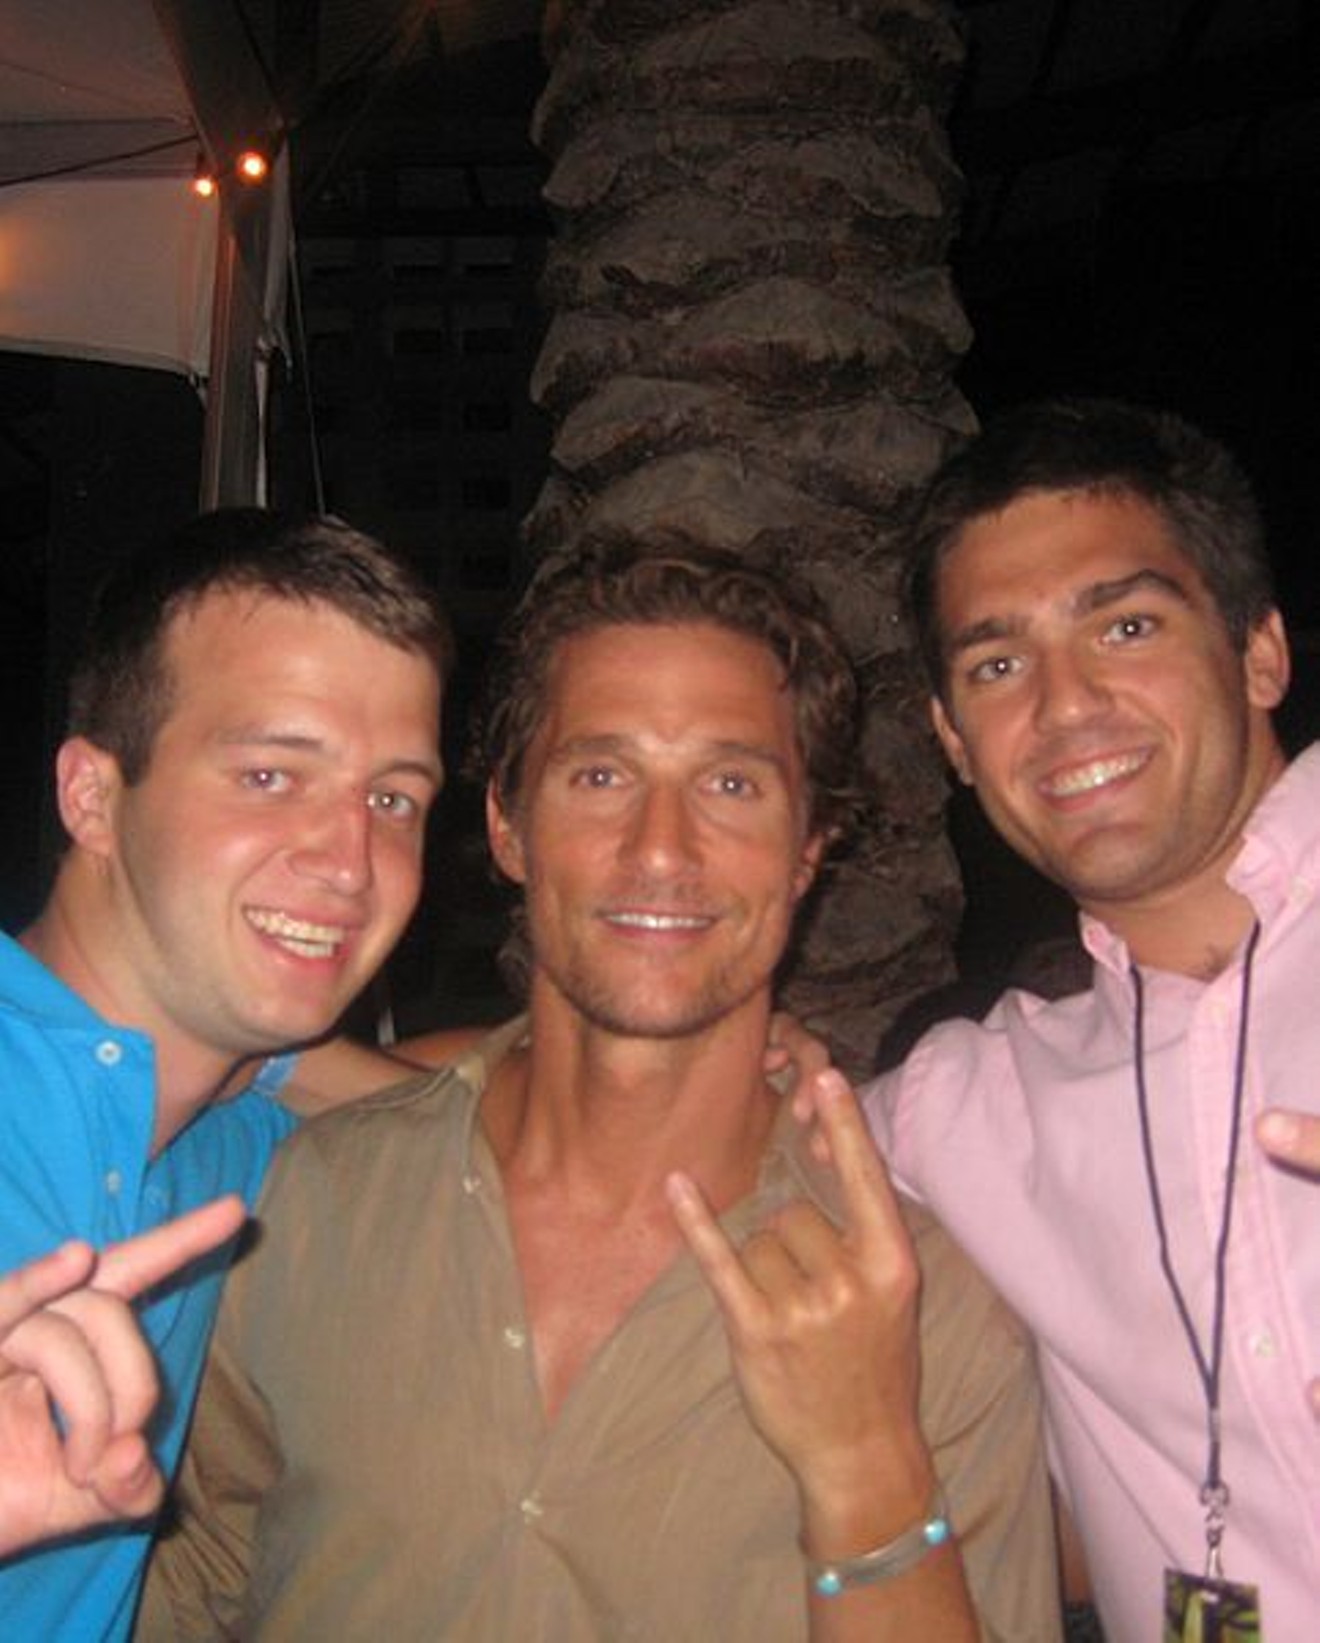 Here is Matthew McConaughey, center, with some guys!